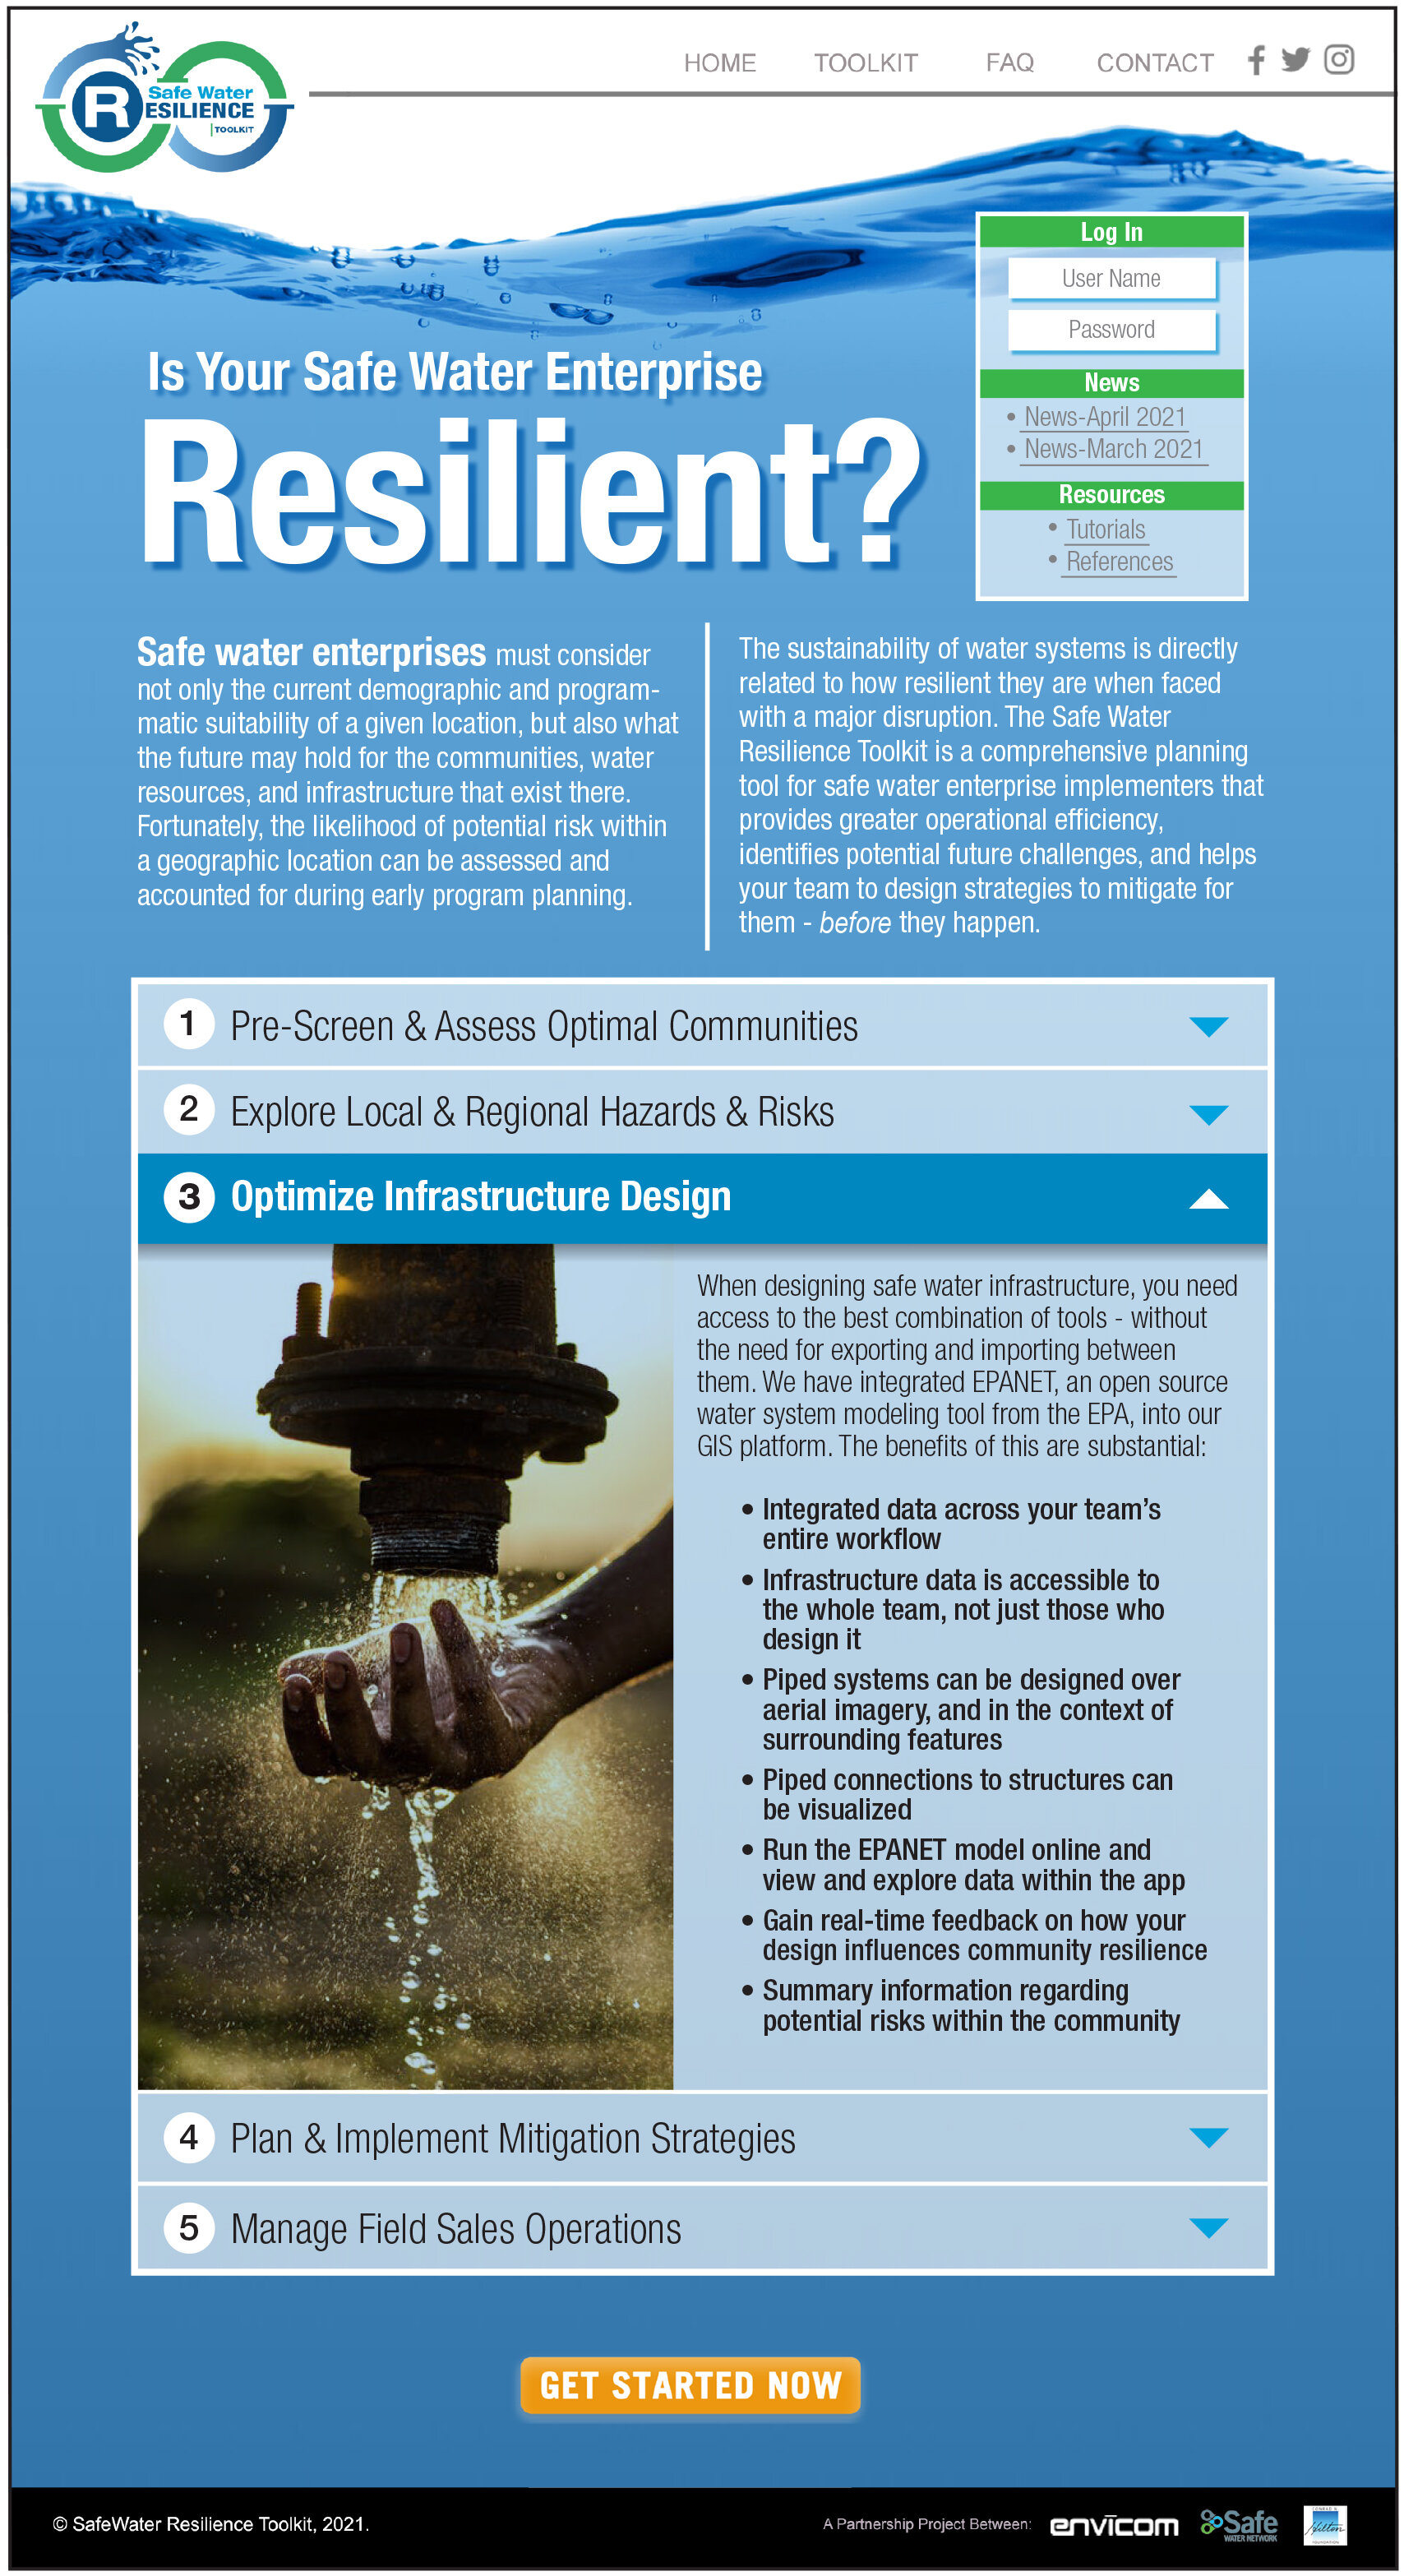 Bombeo de agua manual  SSWM - Find tools for sustainable sanitation and  water management!